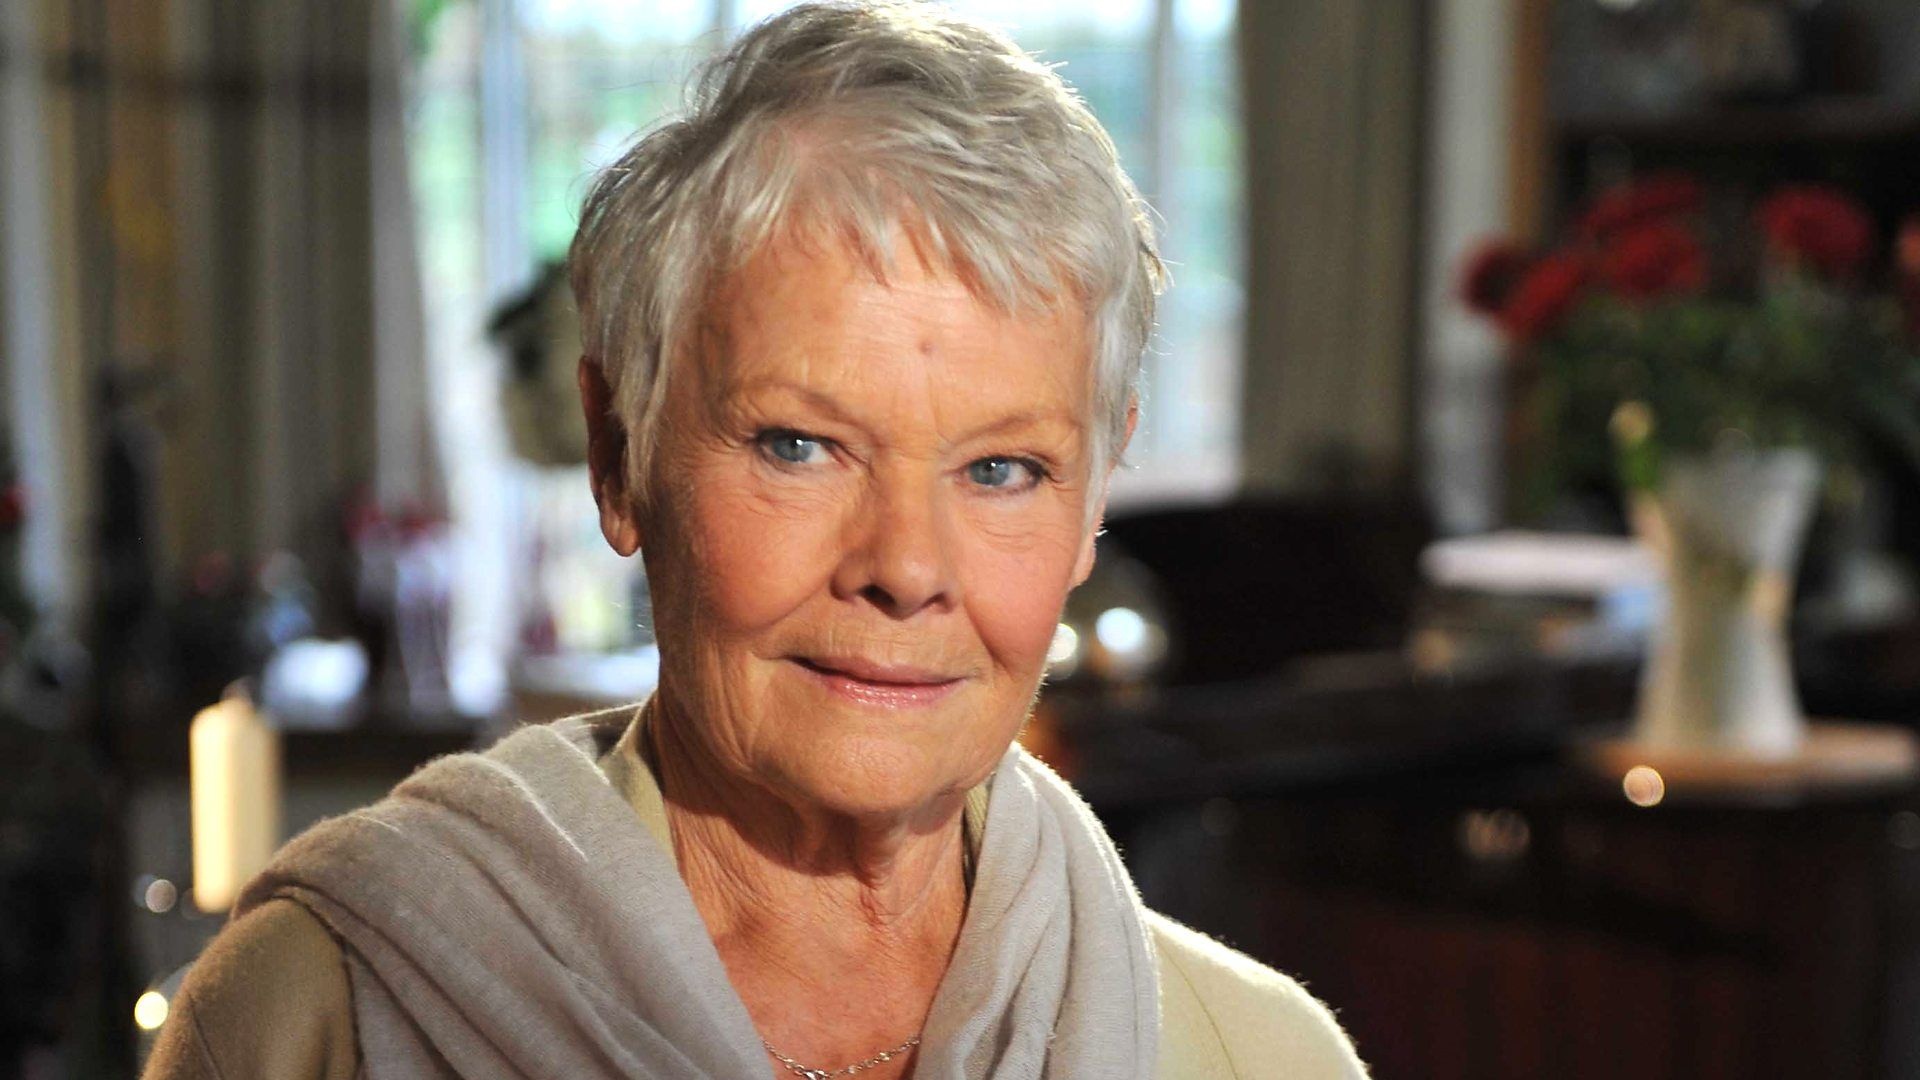 Judi Dench, Movies, Best Pictures, Collection, 1920x1080 Full HD Desktop